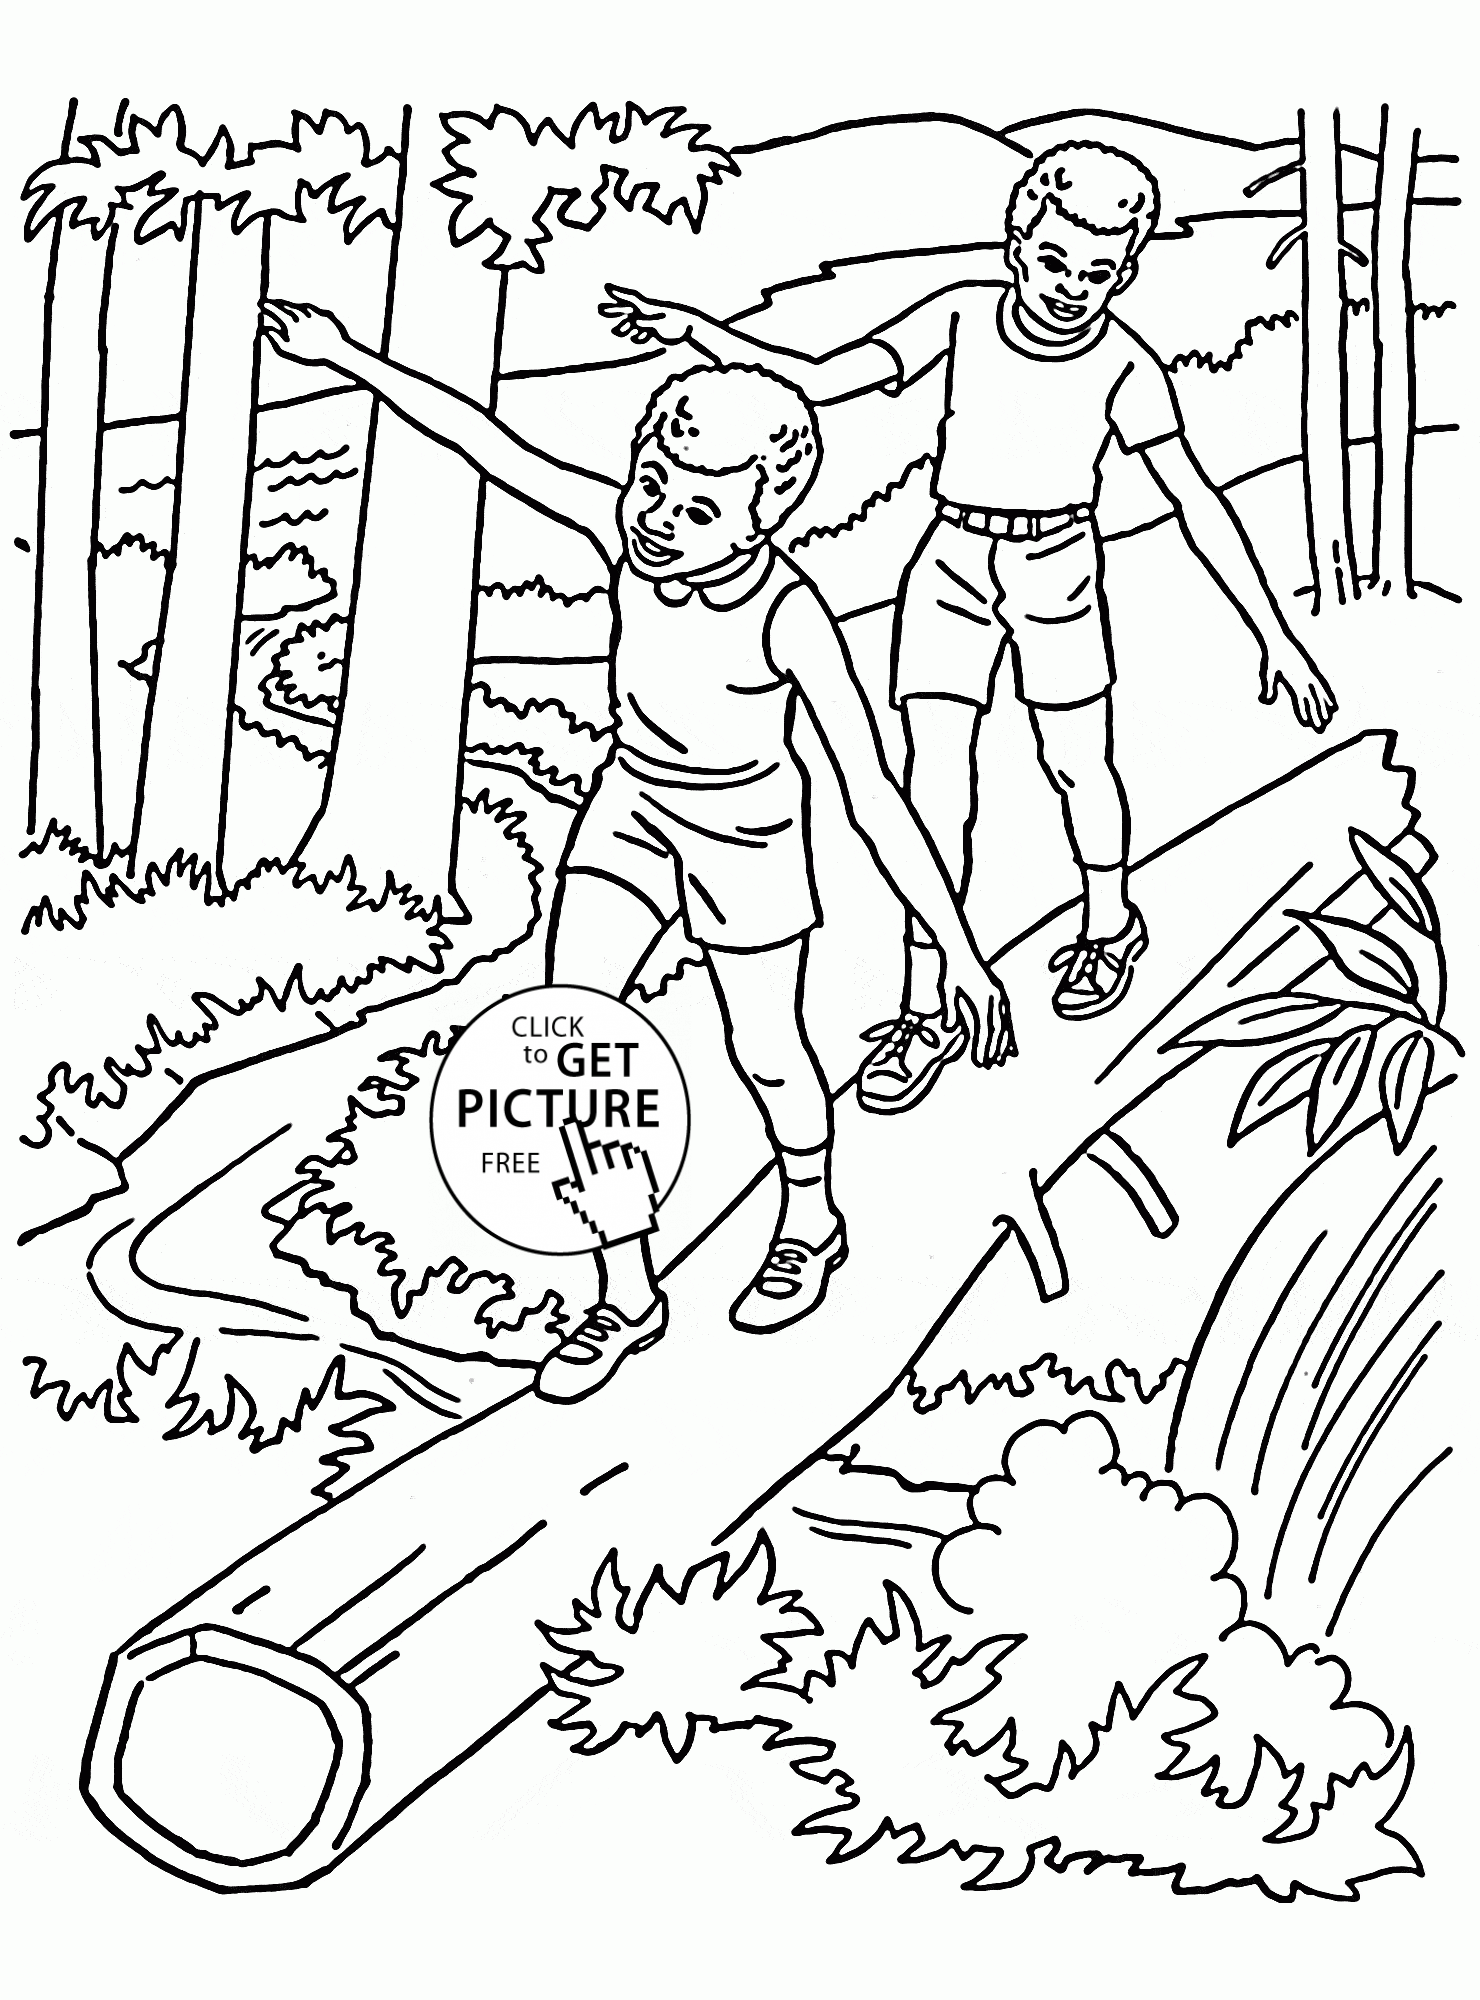 Forest Coloring Pages Printable - Coloring Home